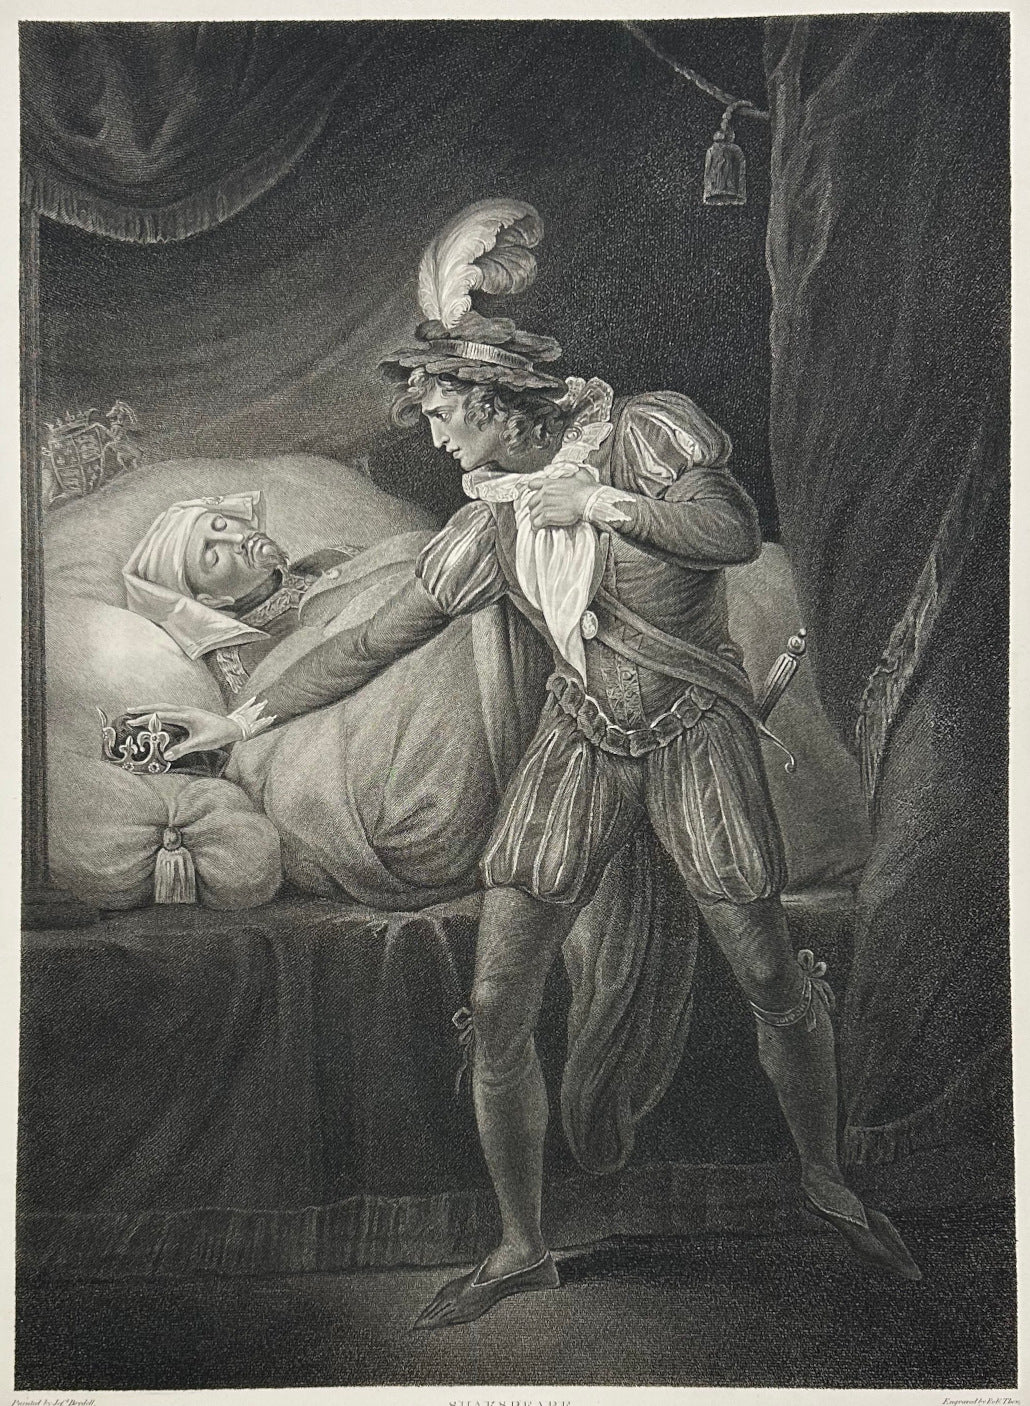 Boydell, Josiah Plate 64. “Second Part, King Henry IV, Act IV, Scene iv. Westminster. King Henry, asleep, and the Prince of Wales